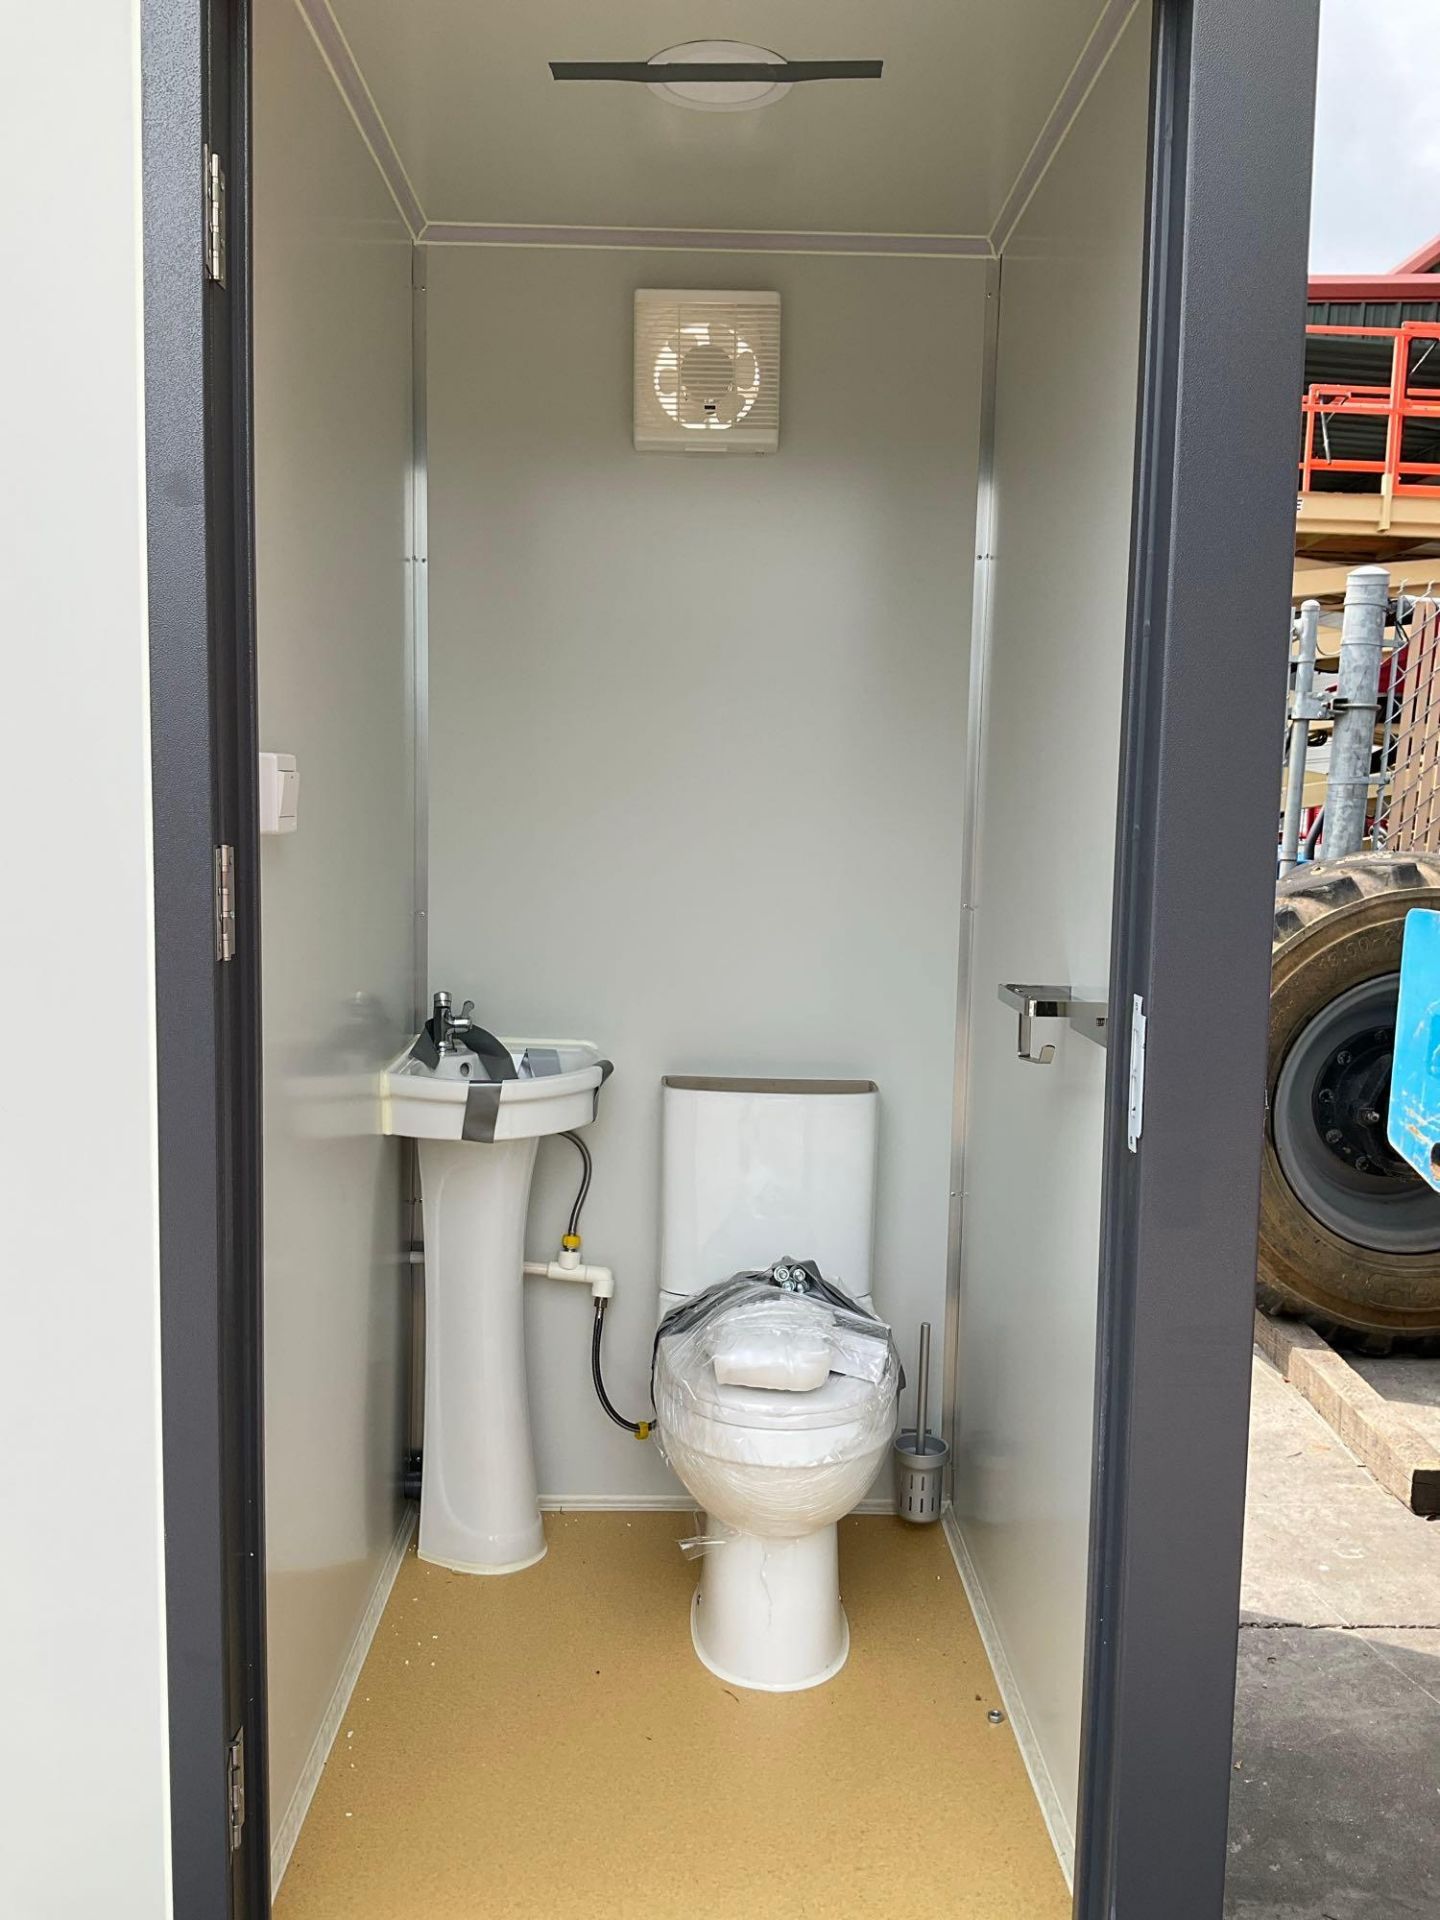 UNUSED PORTABLE DOUBLE BATHROOM UNIT, 2 STALLS, ELECTRIC & PLUMBING HOOK UP WITH EXTERIOR PLUMBING - Image 13 of 14